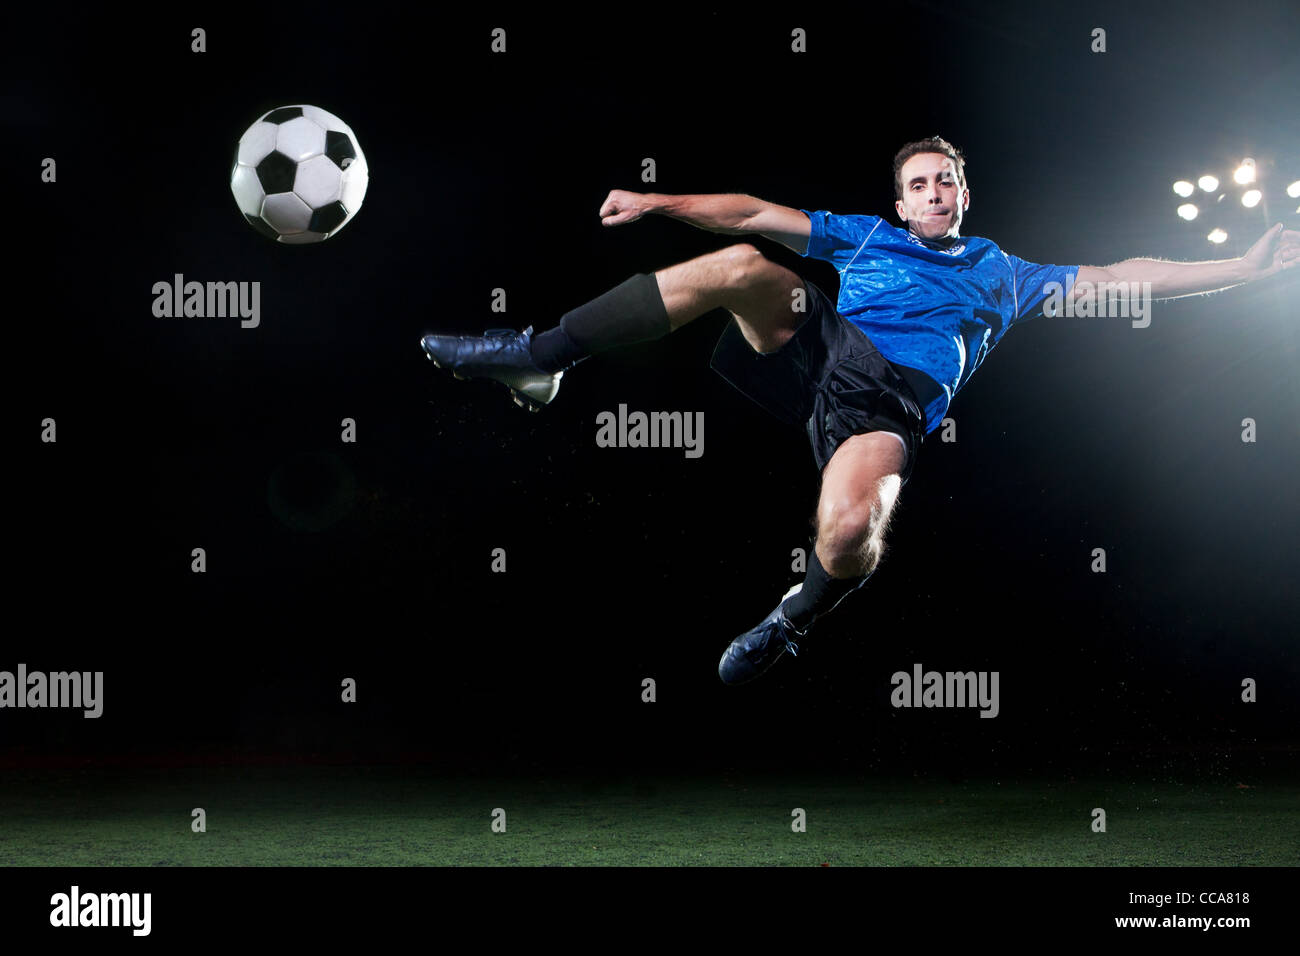 Young soccer player leaping into air to kick ball Stock Photo